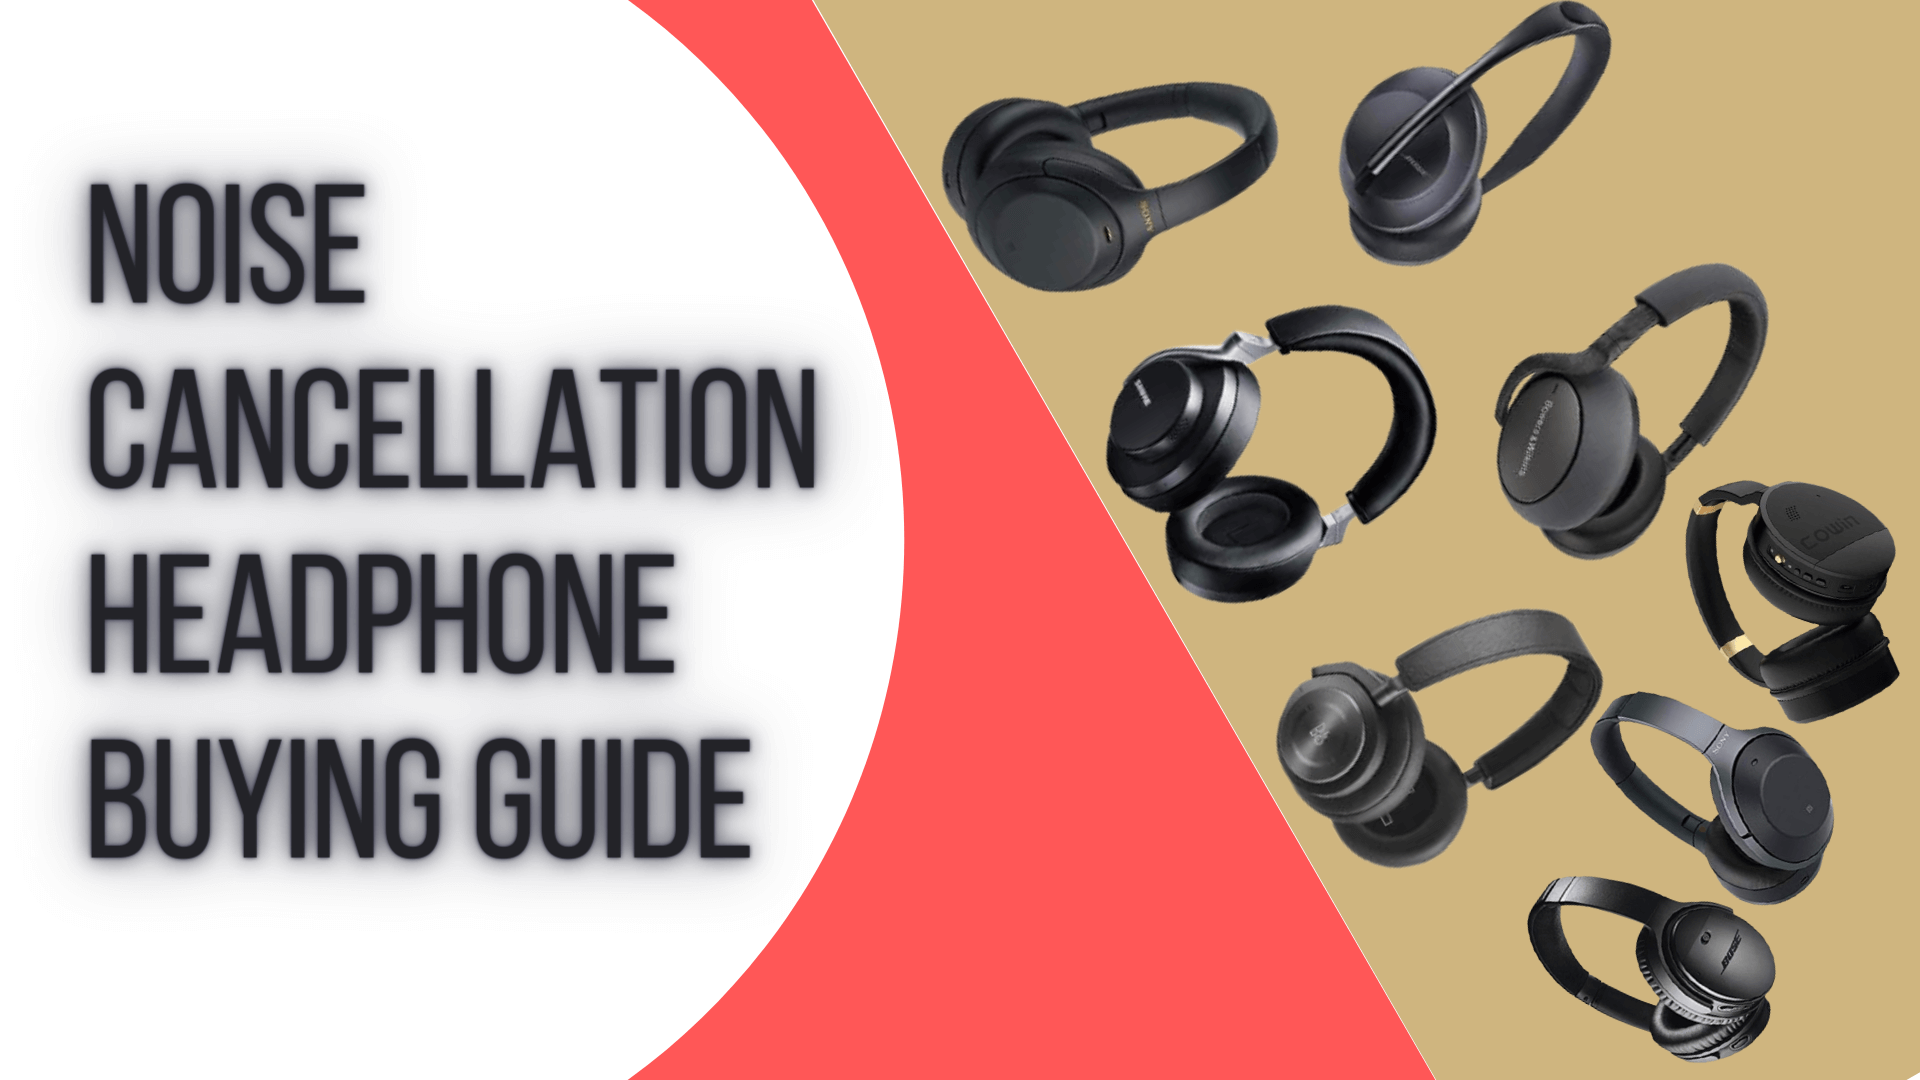 Noise Cancellation Headphone Buying Guide